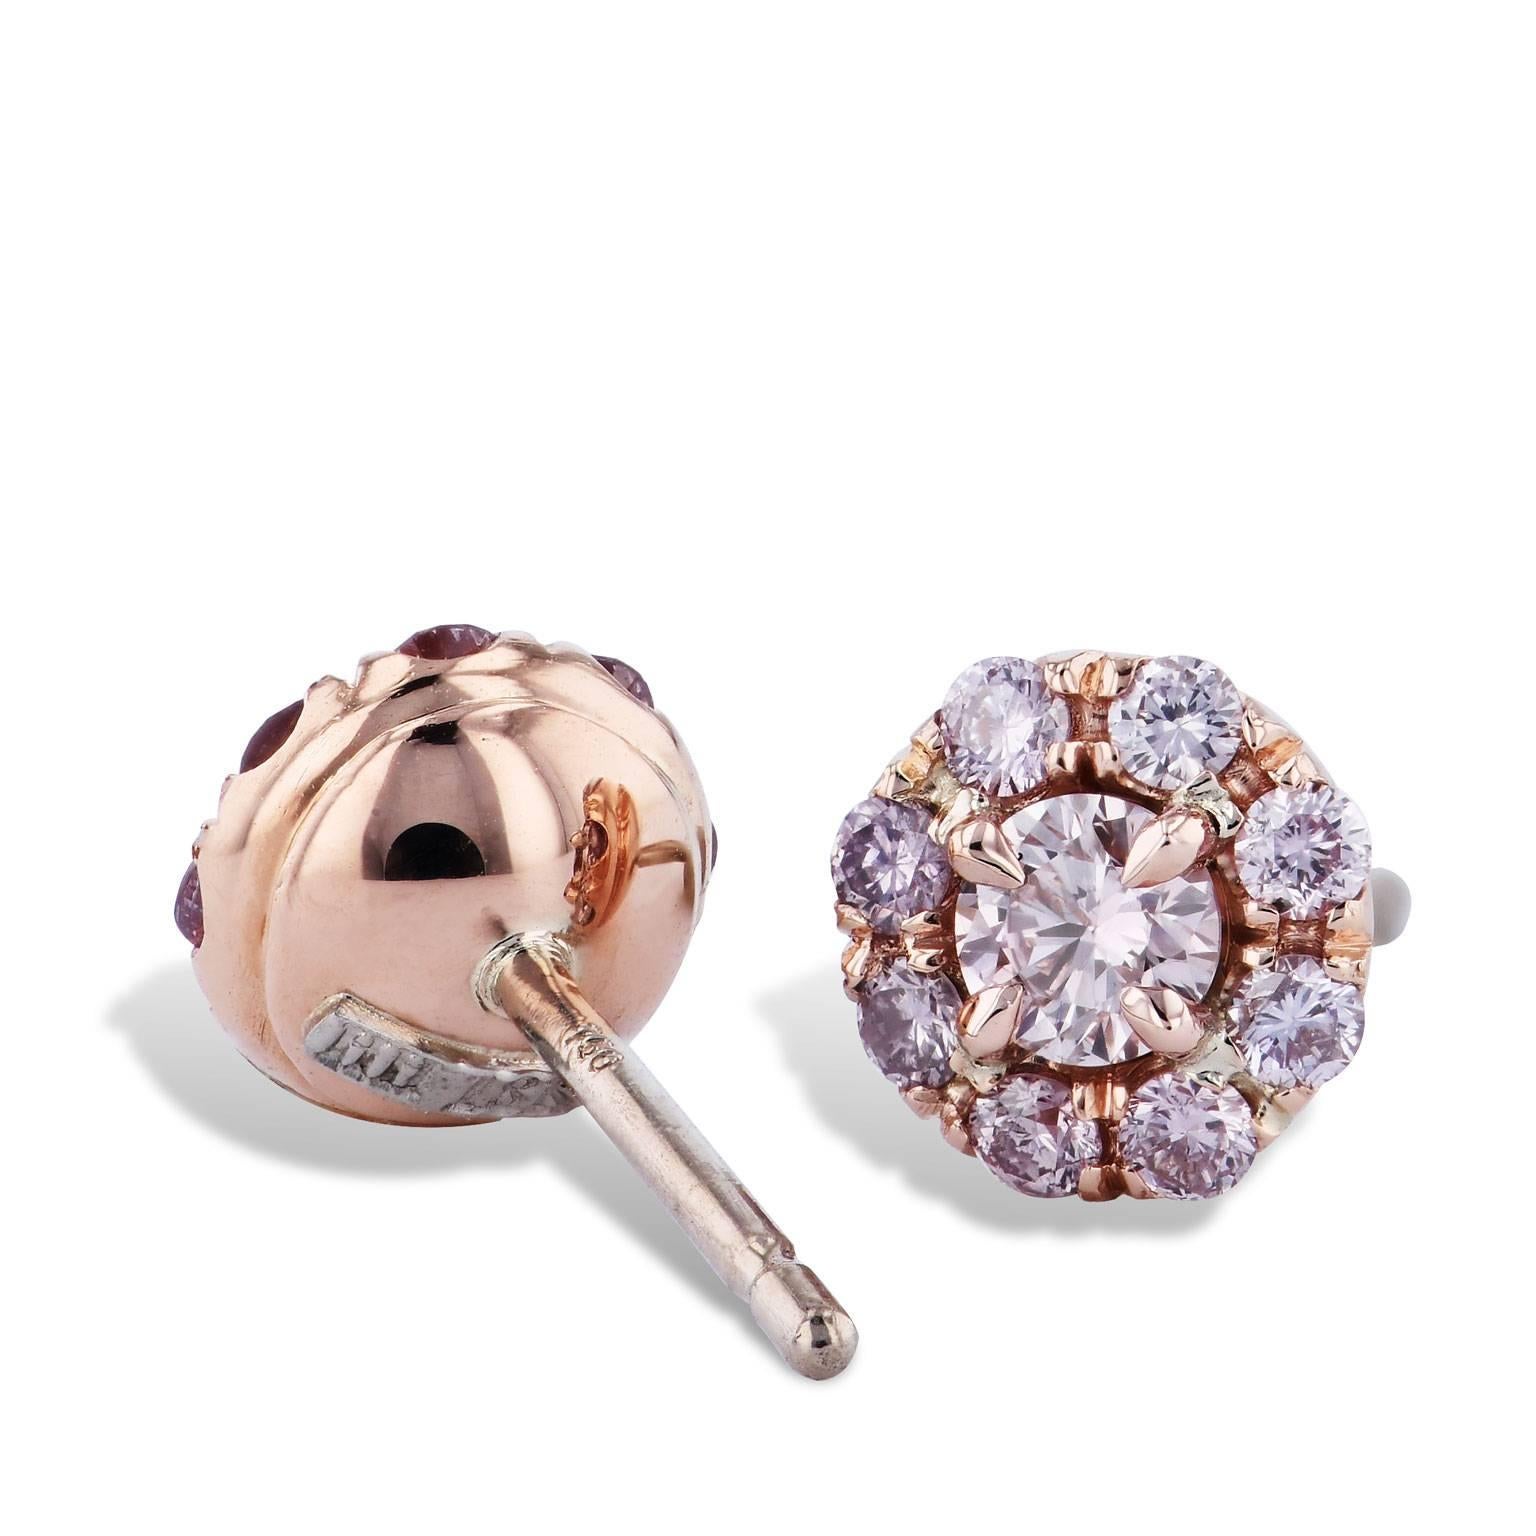 H&H 0.60 Carat Pink Diamond Rose Gold Stud Earrings

These earrings handmade are one of a kind and made by H&H Jewels.  
They are made of 18 karat rose gold that acts as a backdrop to a beautiful sea of 0.60 carat of pink diamond pave.
These pink